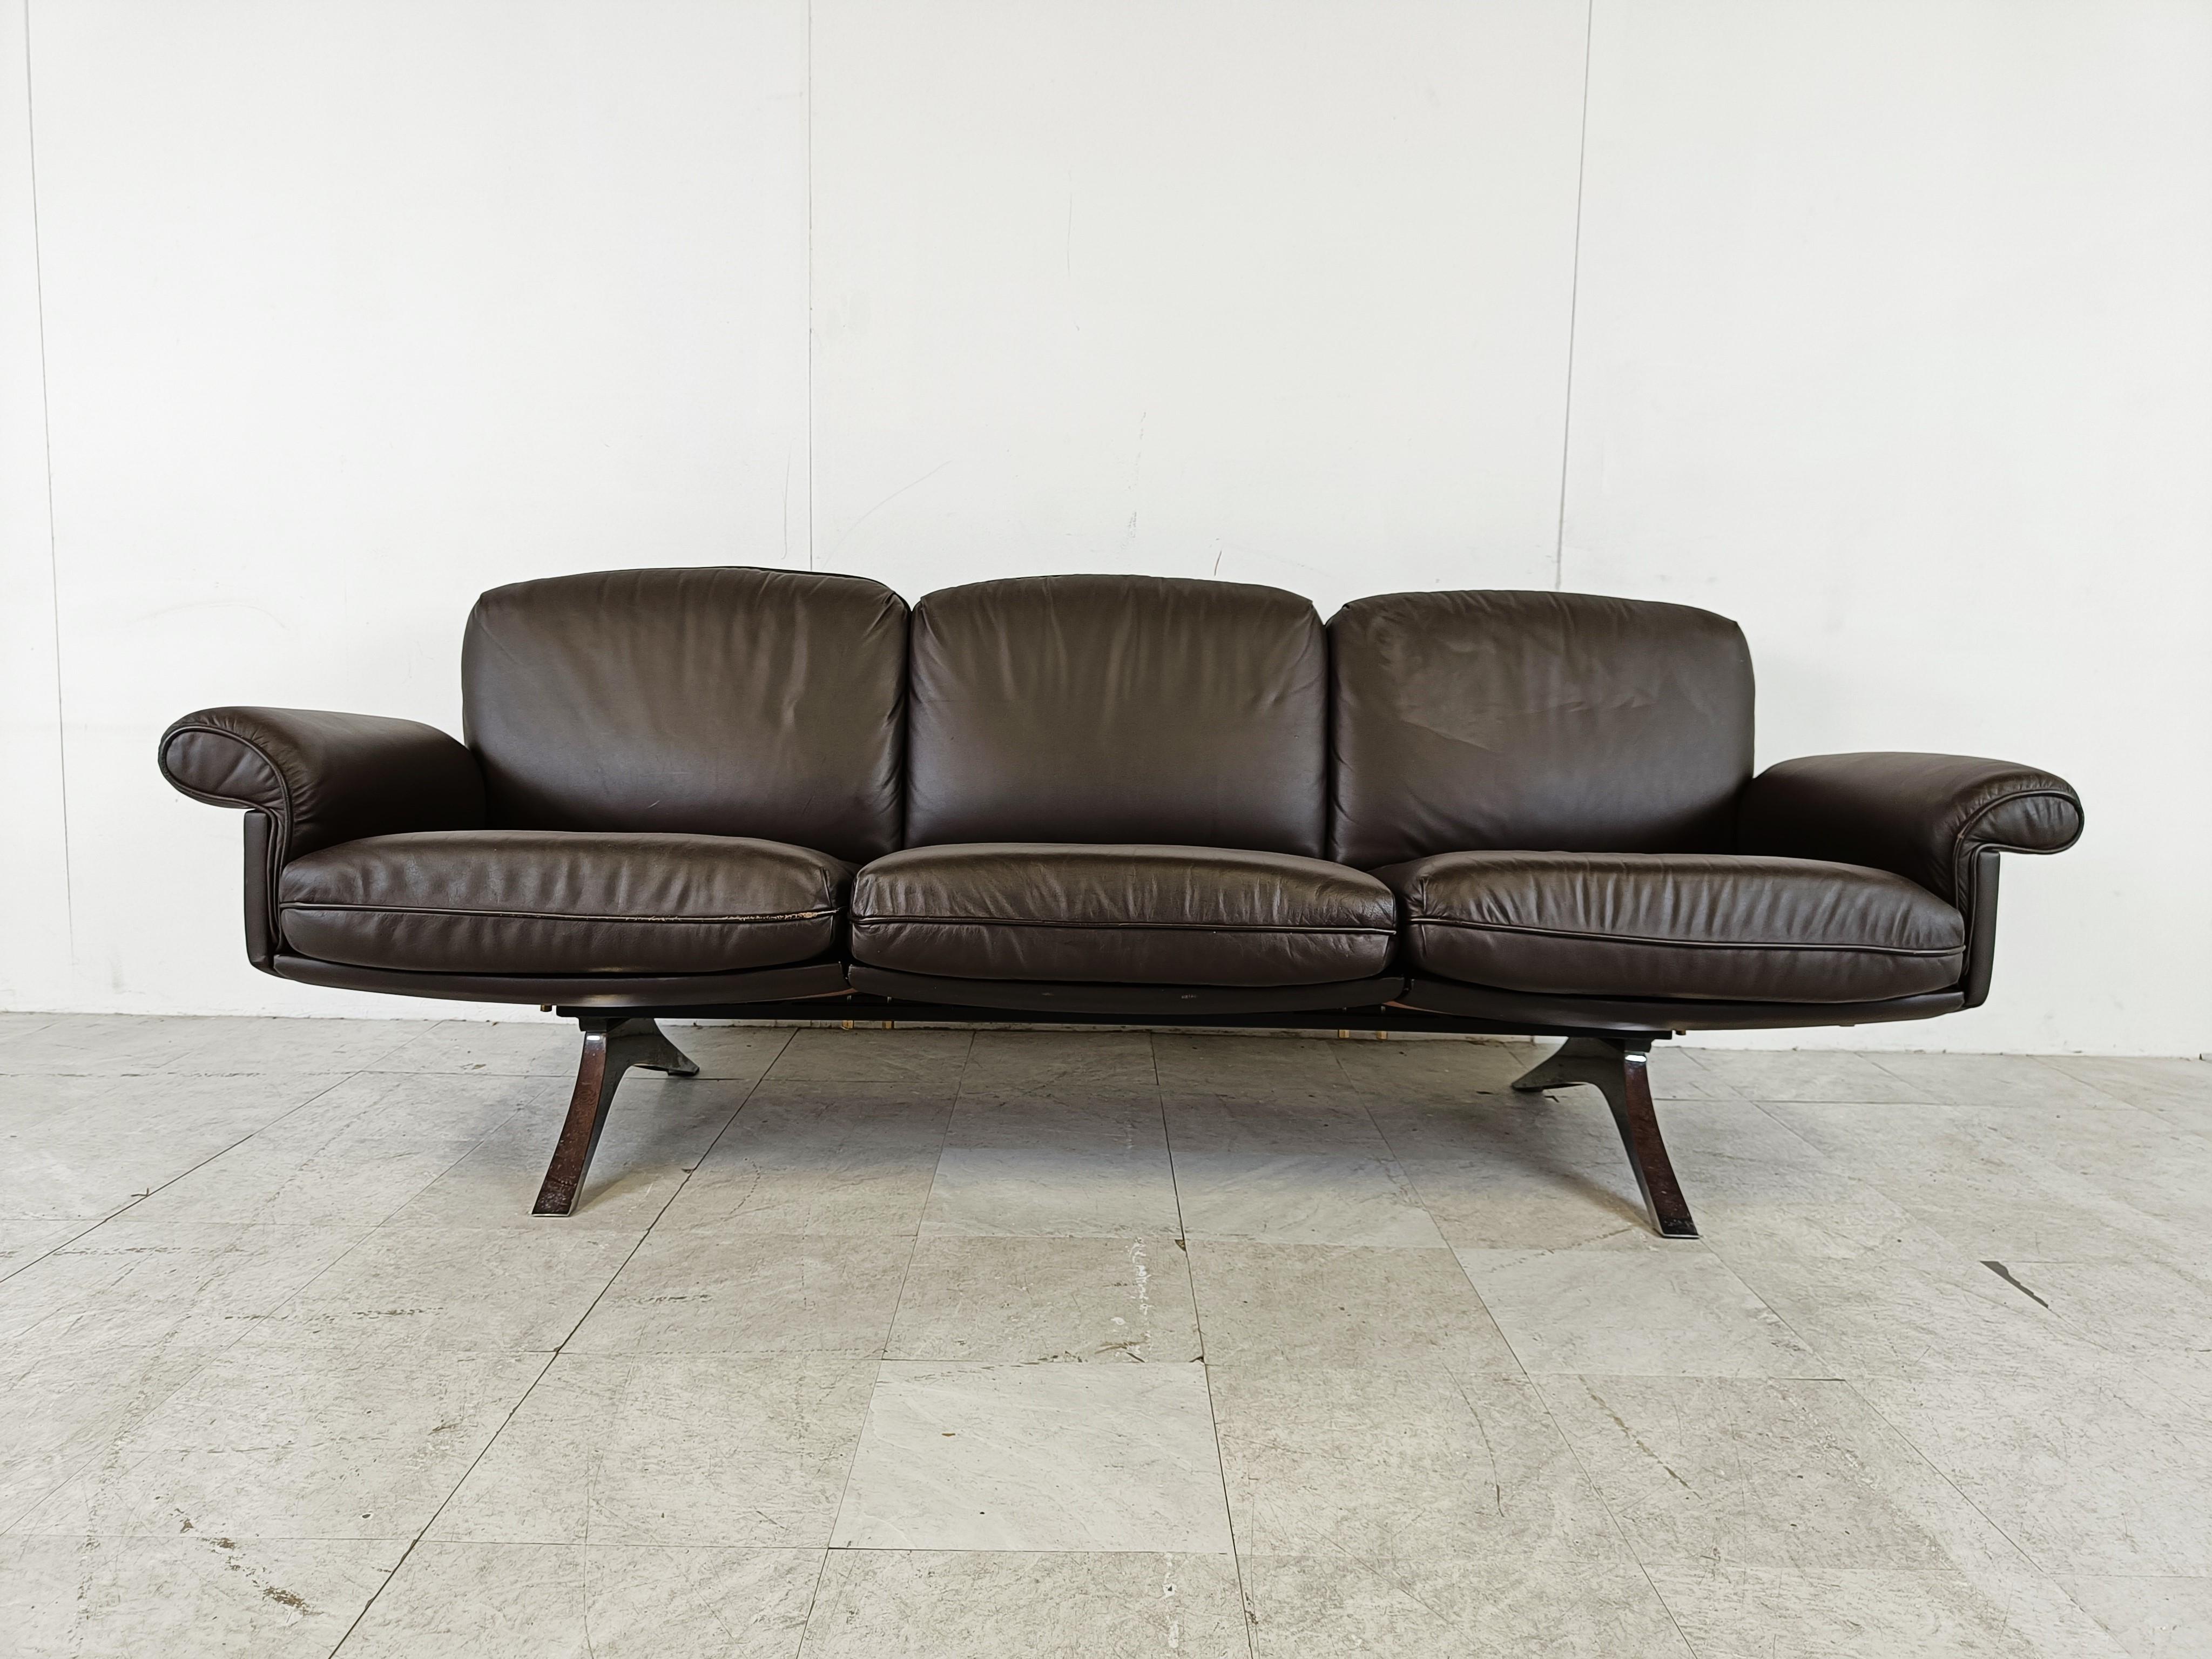 Swiss De Sede DS31 Sofa in Brown Leather, 1970s For Sale